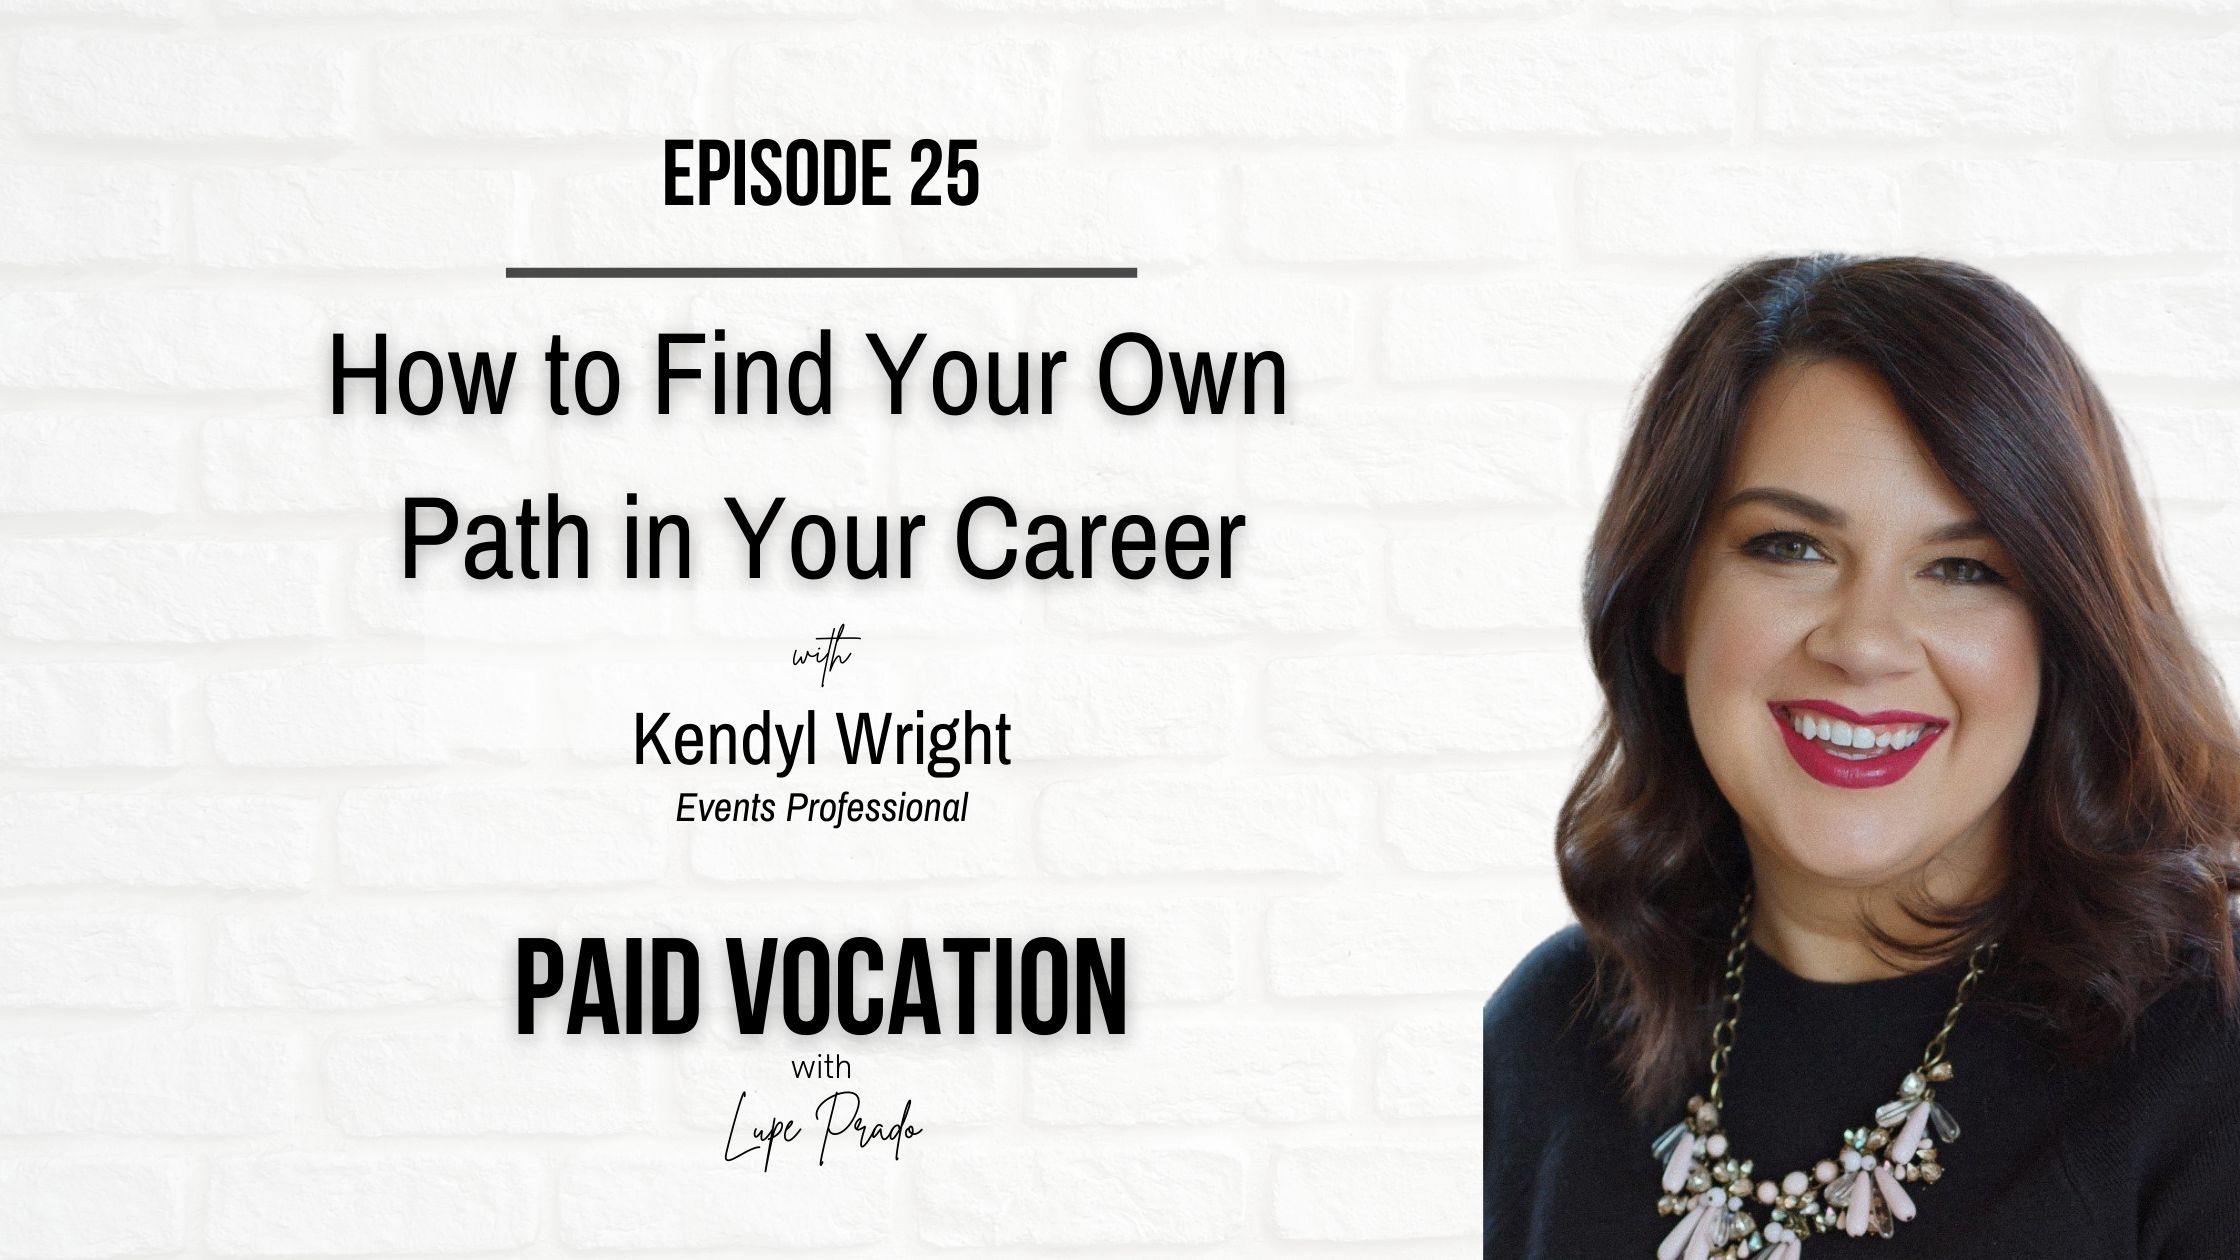 How to Find Your Own Path In Your Career | Kendyl Wright